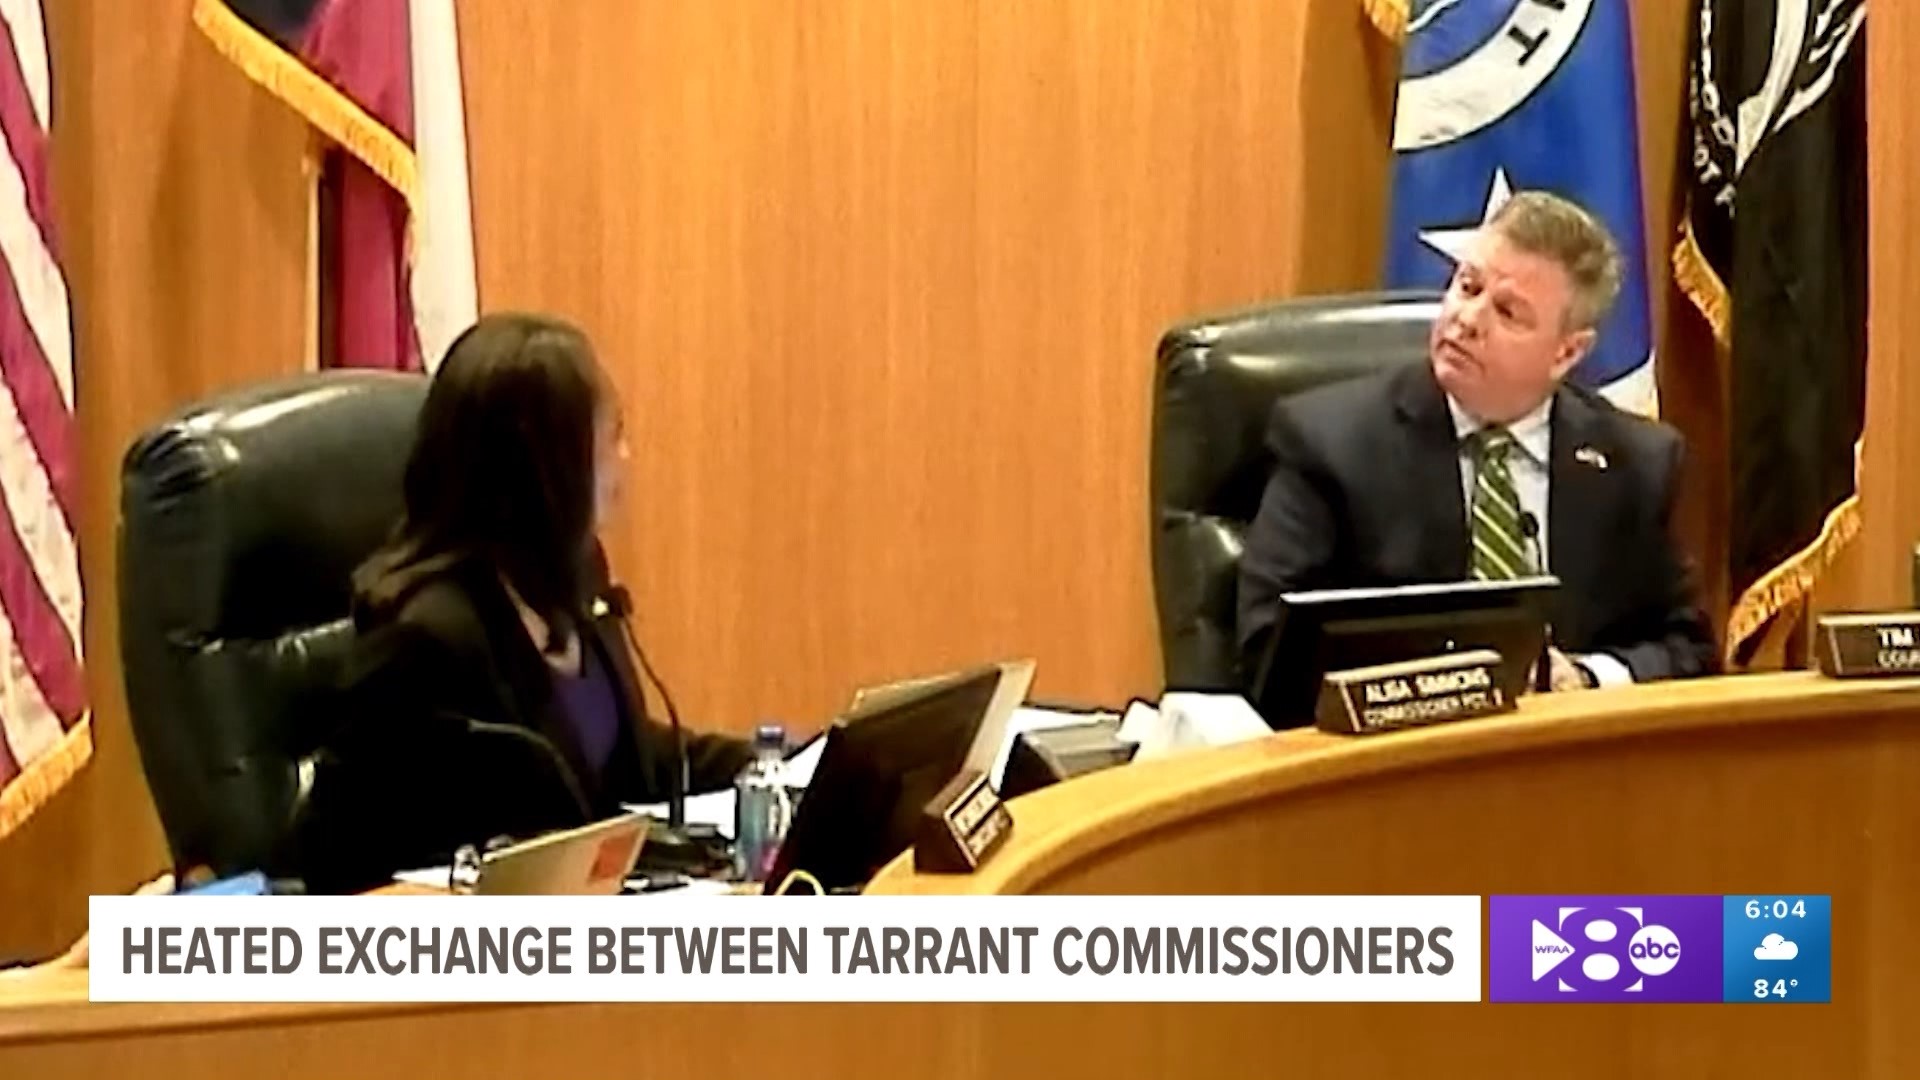 Rhetoric has escalated amid an exchange between two elected officials during Commissioners Court in Tarrant County.